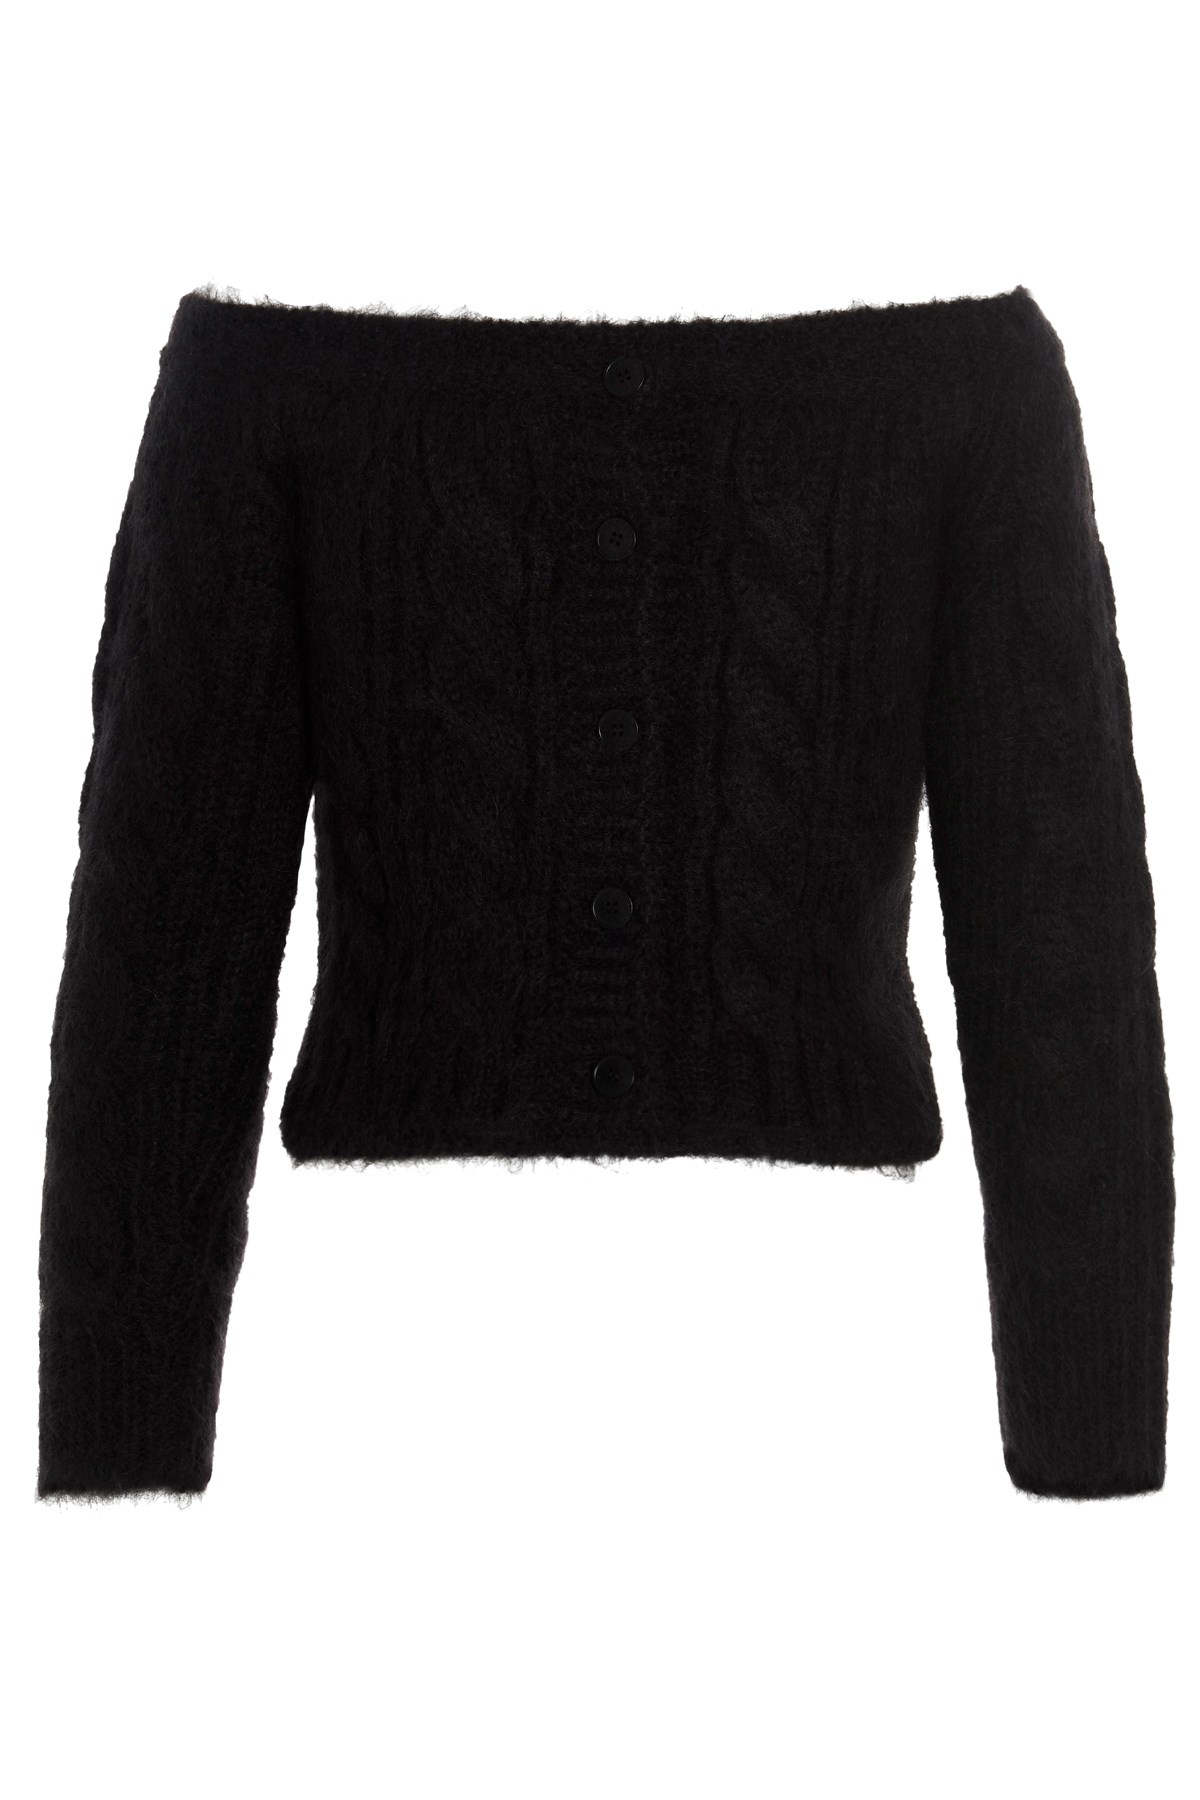 CECILIE BAHNSEN Mohair Cable Pattern Sweater